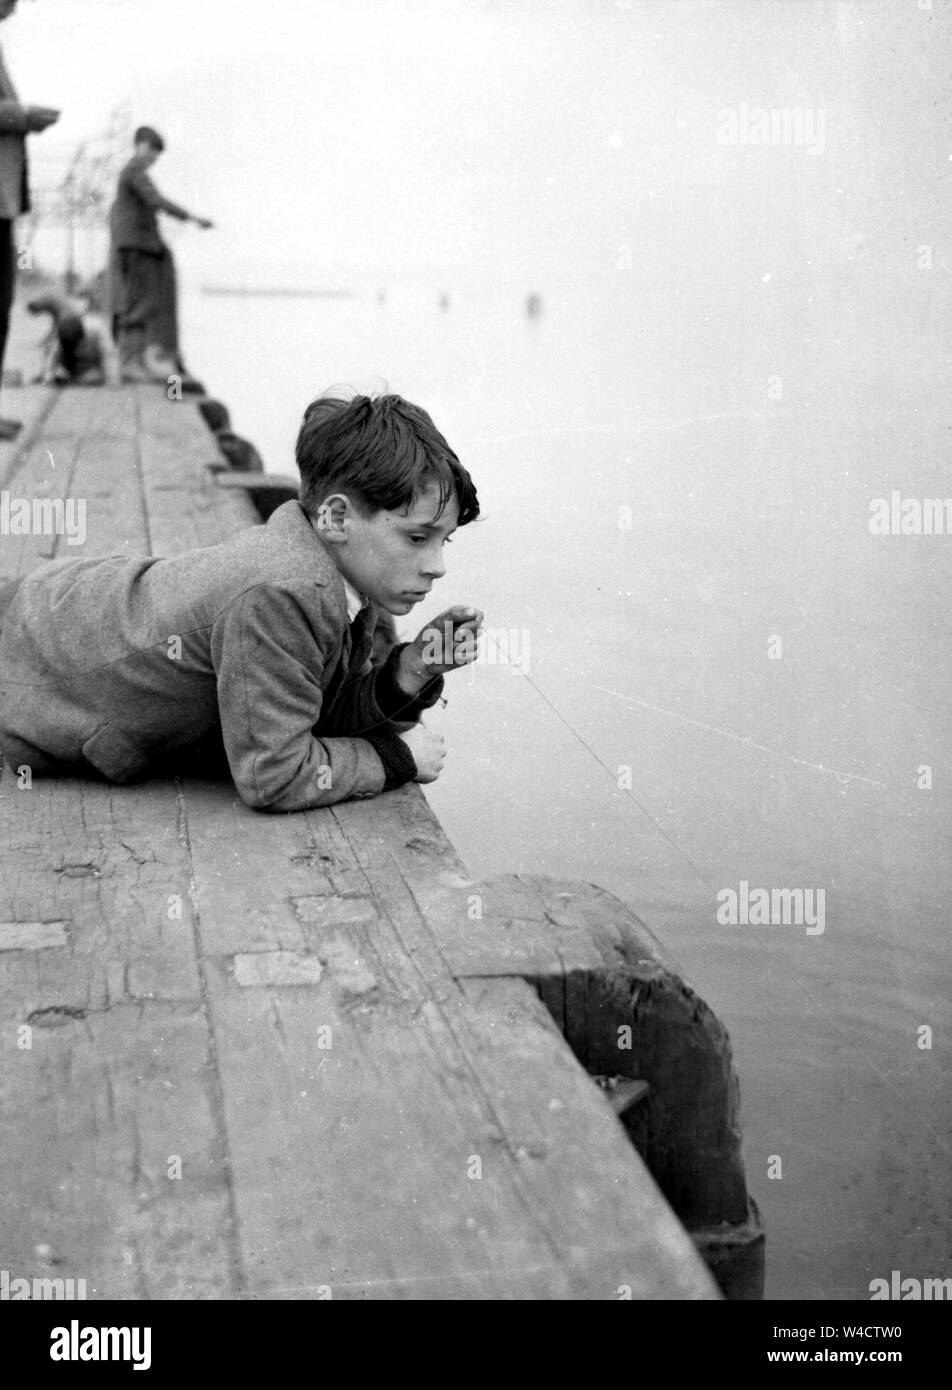 A young boy lays on his tummy on a pier while fishing with just a line in the 1930s or 1940s Stock Photo